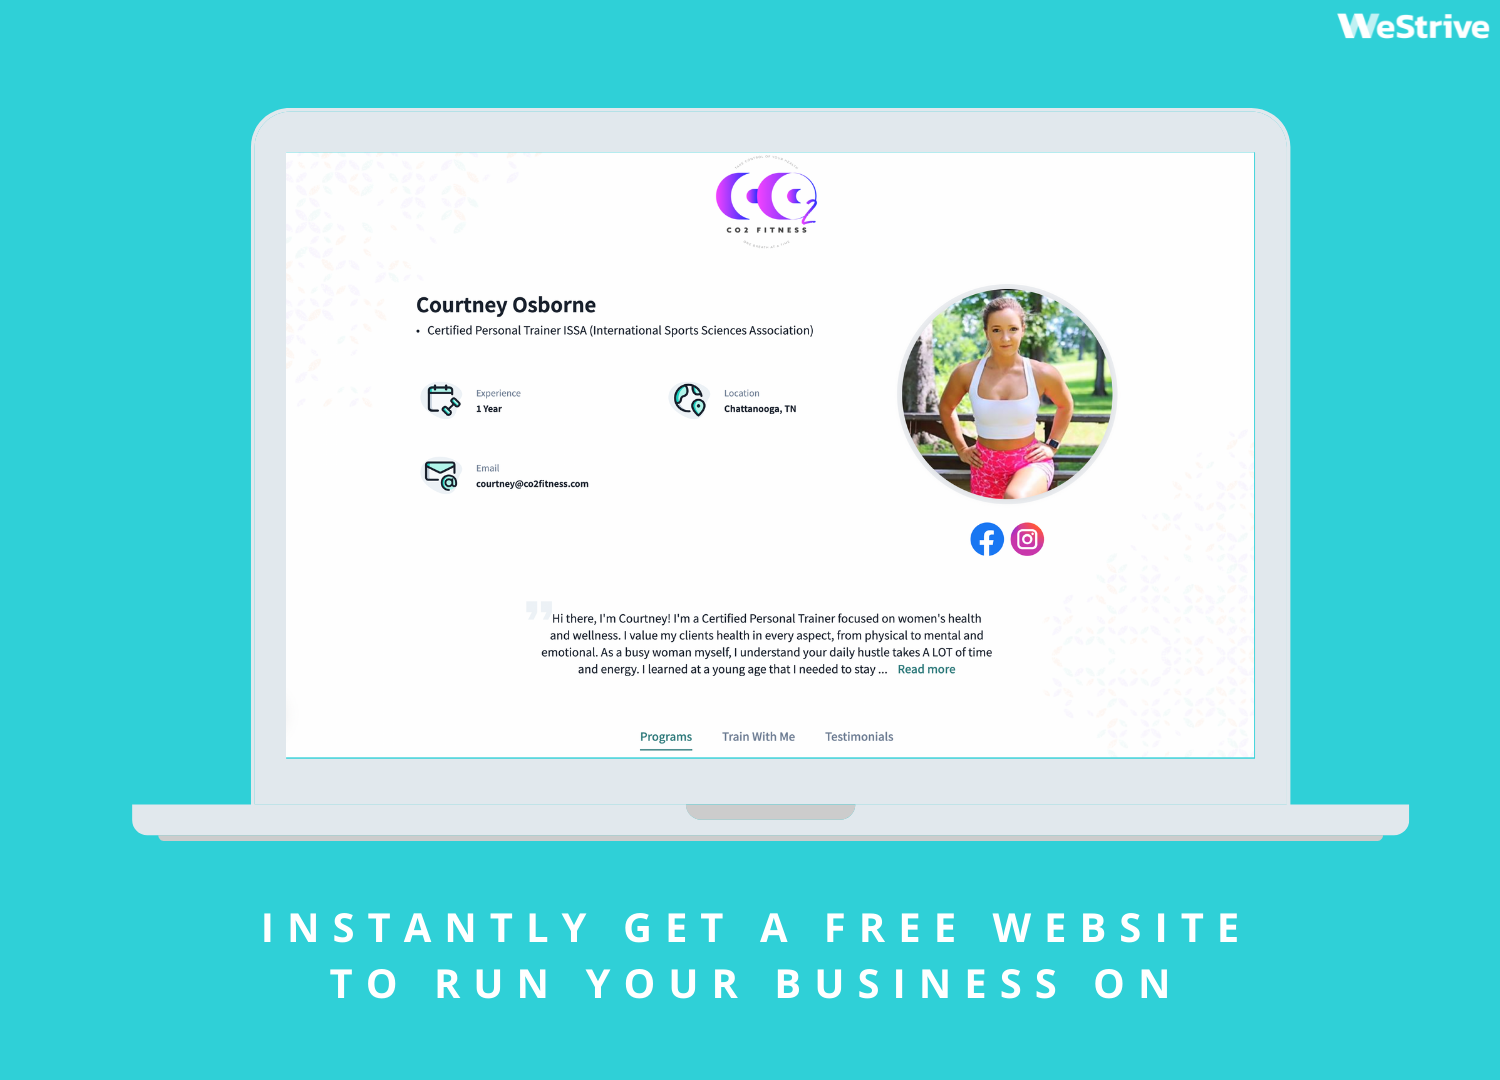 Instantly get a free website to run your business on